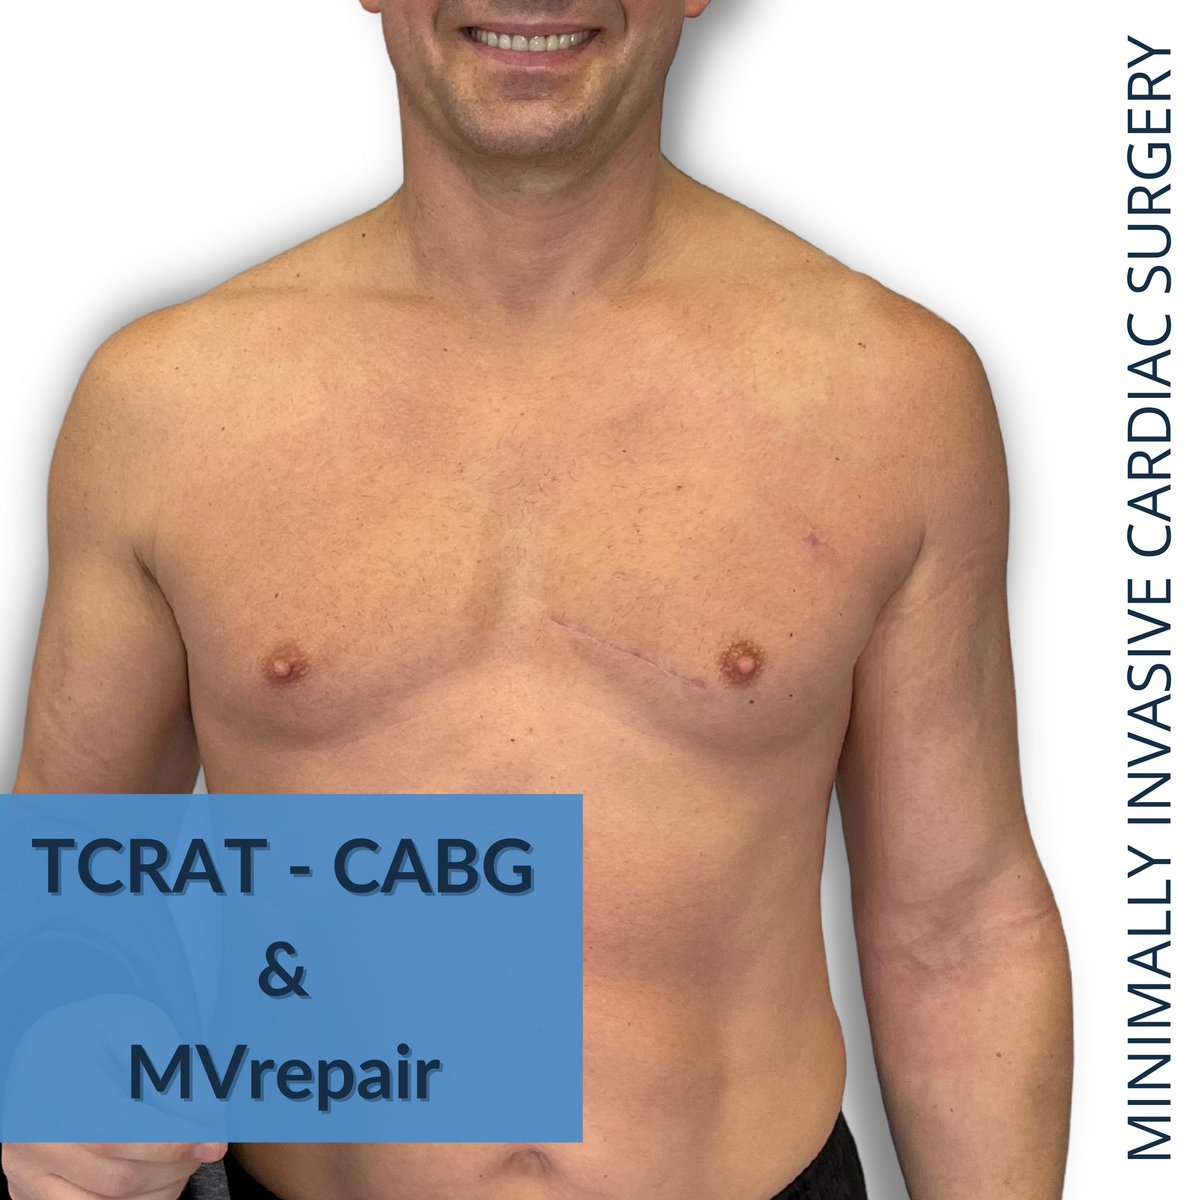 #CABG & #MitralValveRepair (ring and artificial chords). Avoiding sternotomy, only one minimally invasive approach.
1 month postop
Scar is hardly recognized on the left chest